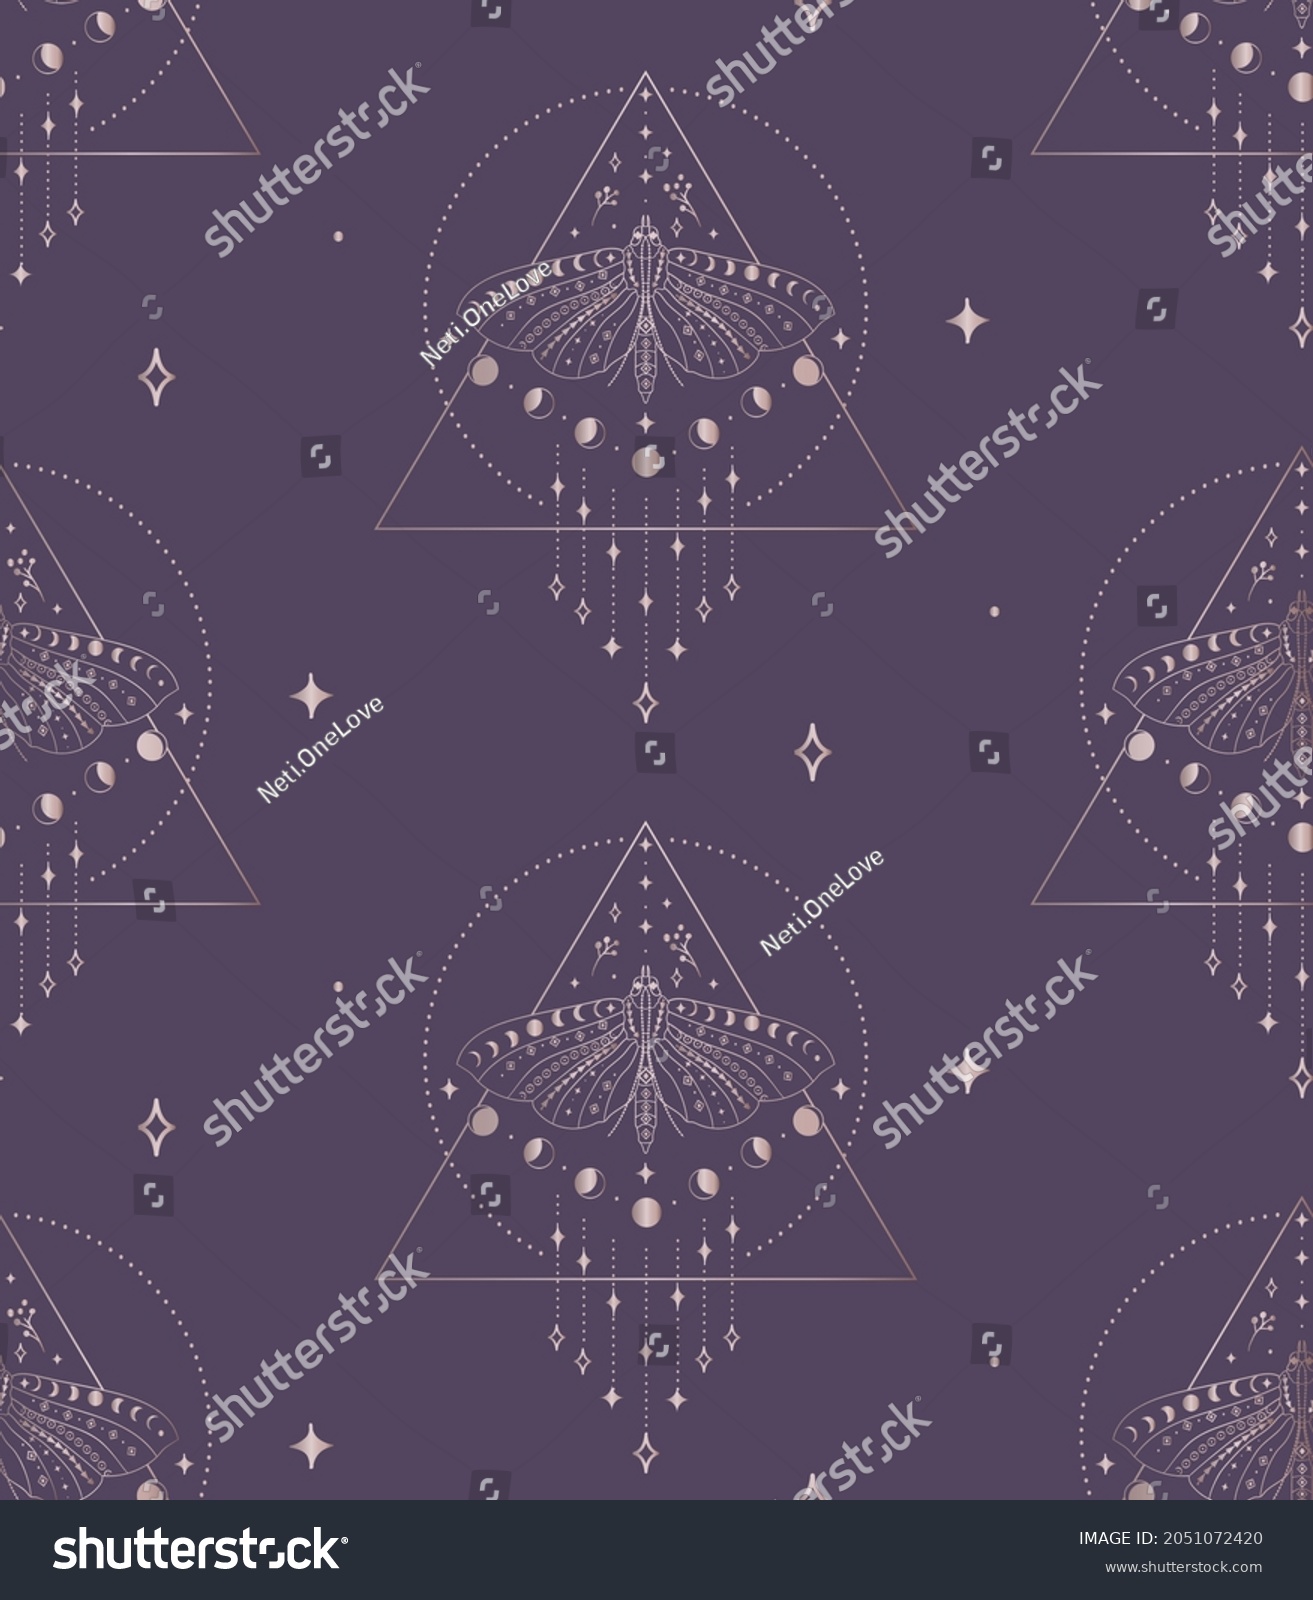 SVG of Abstract Background Seamless Pattern with Triangles, Circles, Moon Phases, Batterflies, branches, berries. Mystic Design, Vector Illustration for wrapping tissue paper. Pink Gold svg